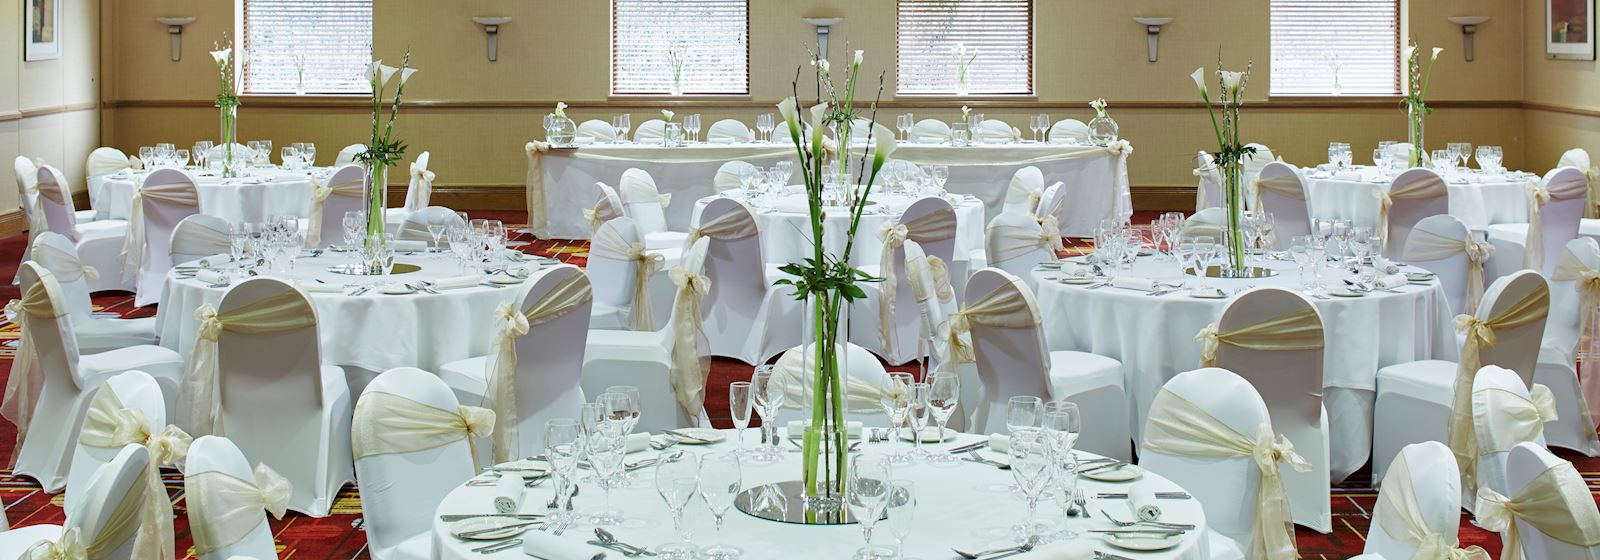 wedding party function rooms swindon